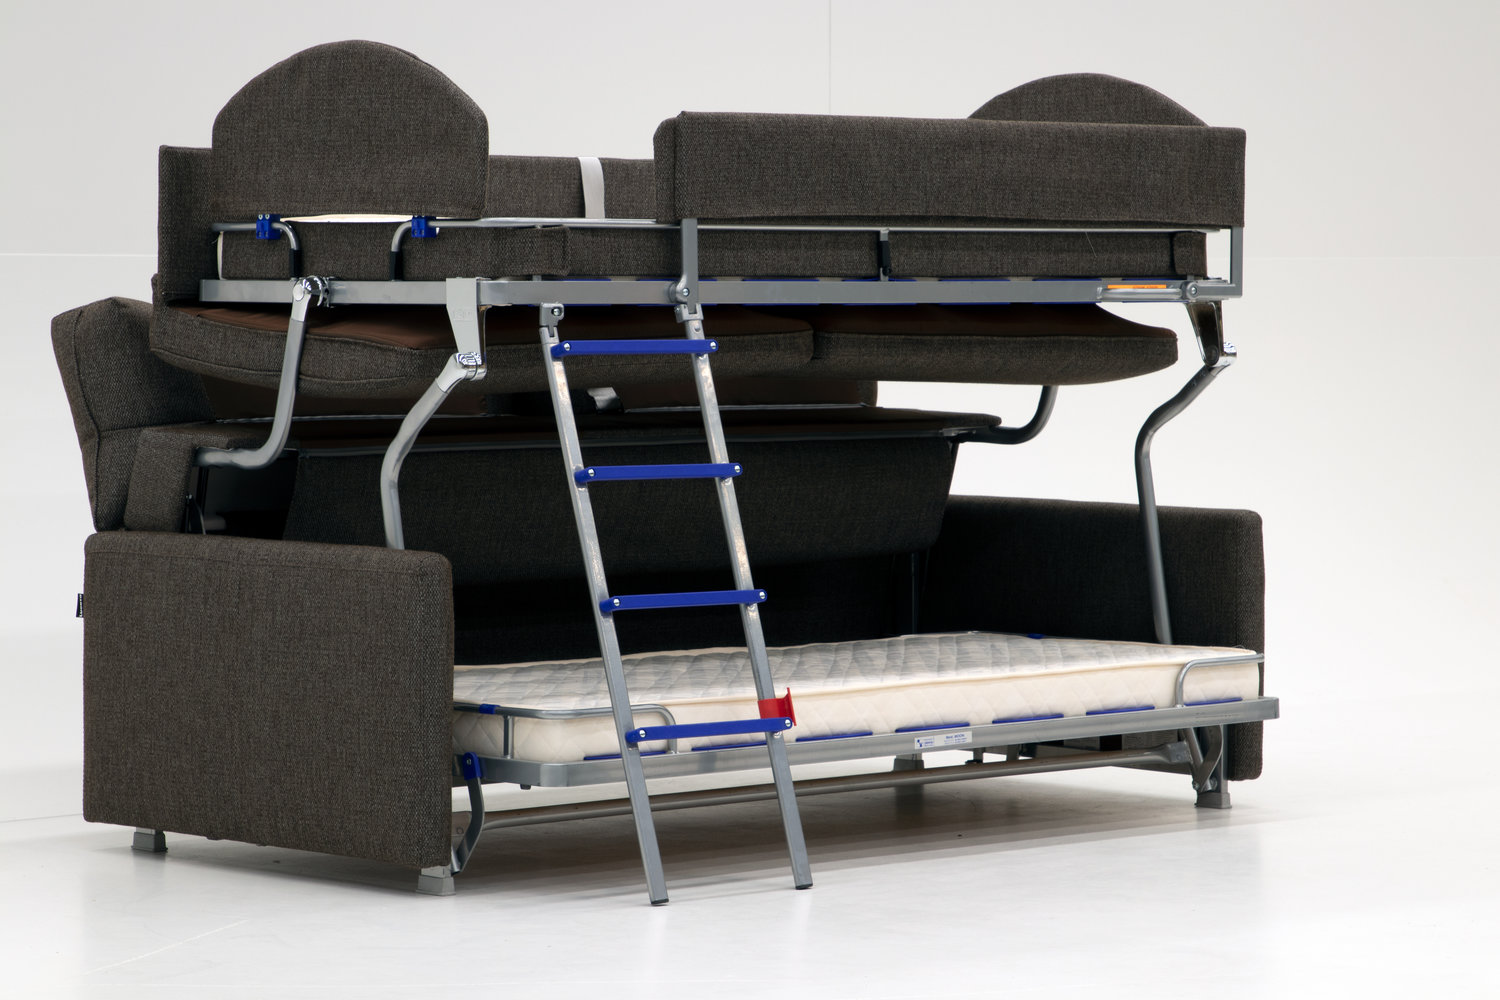 Elevate Bunk Sofa Bed M Collection Home, Bunk Bed That Folds Into A Couch